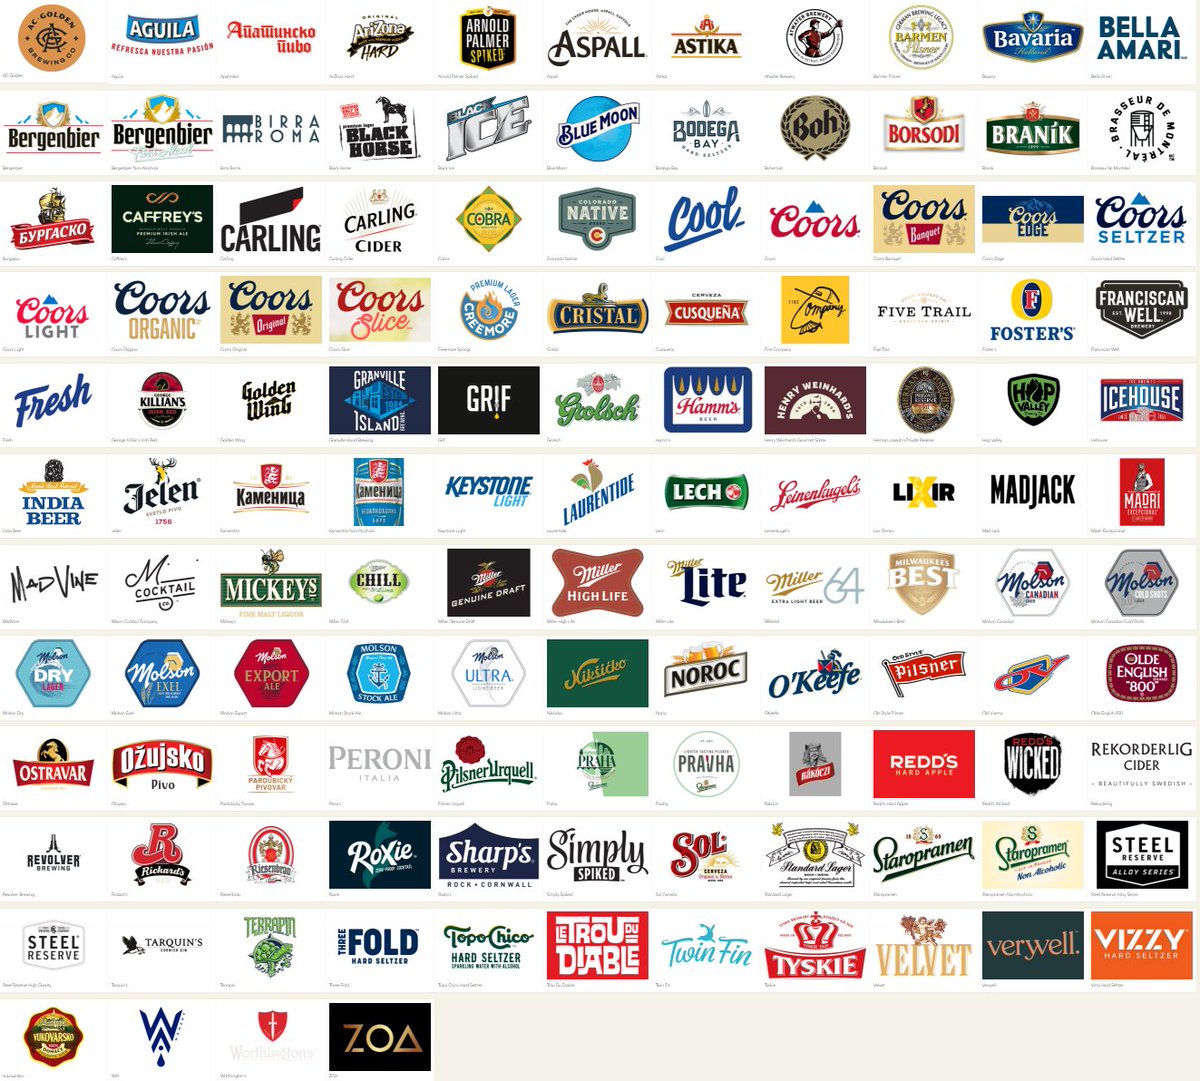 @CitizenFreePres Lol Anheuser-Busch and Molson Coors own everything. They're the Procter and Gamble of beer. Here are all the beers owned by Molson Coors according to their website.
molsoncoors.com/brands/our-bra…